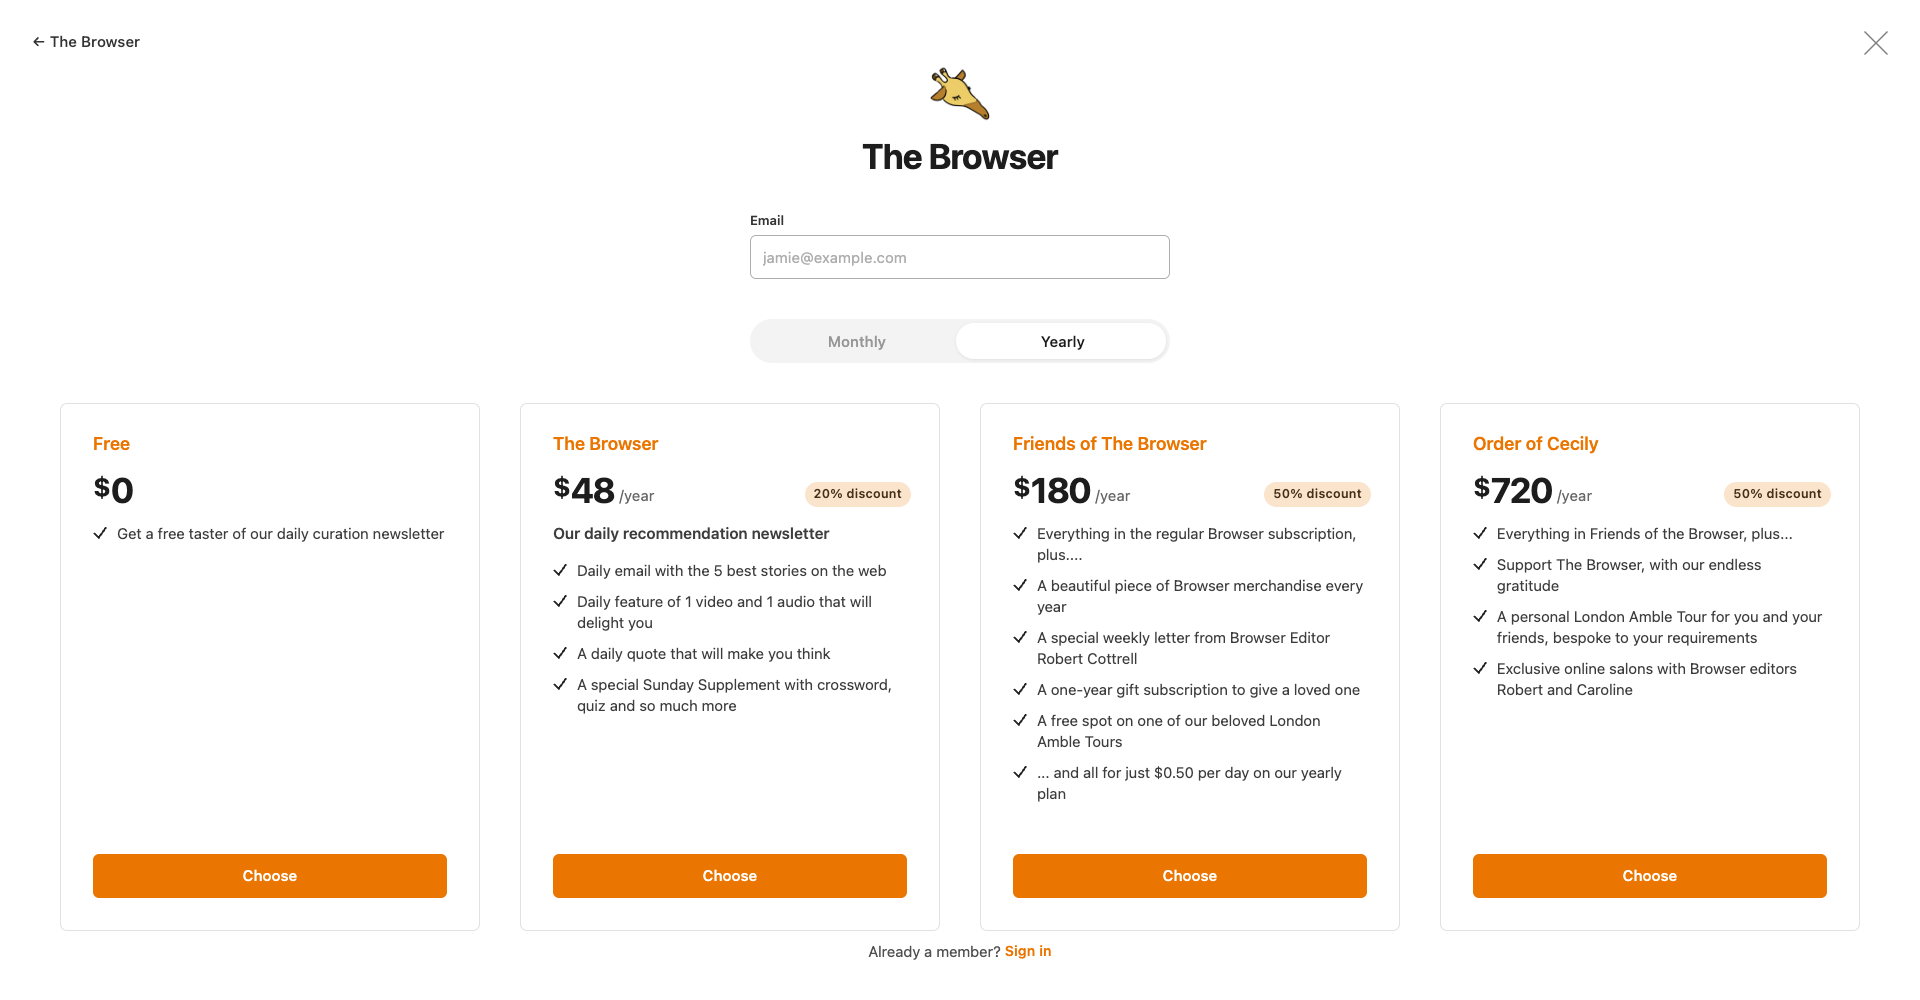 Pricing tiers for The Browser